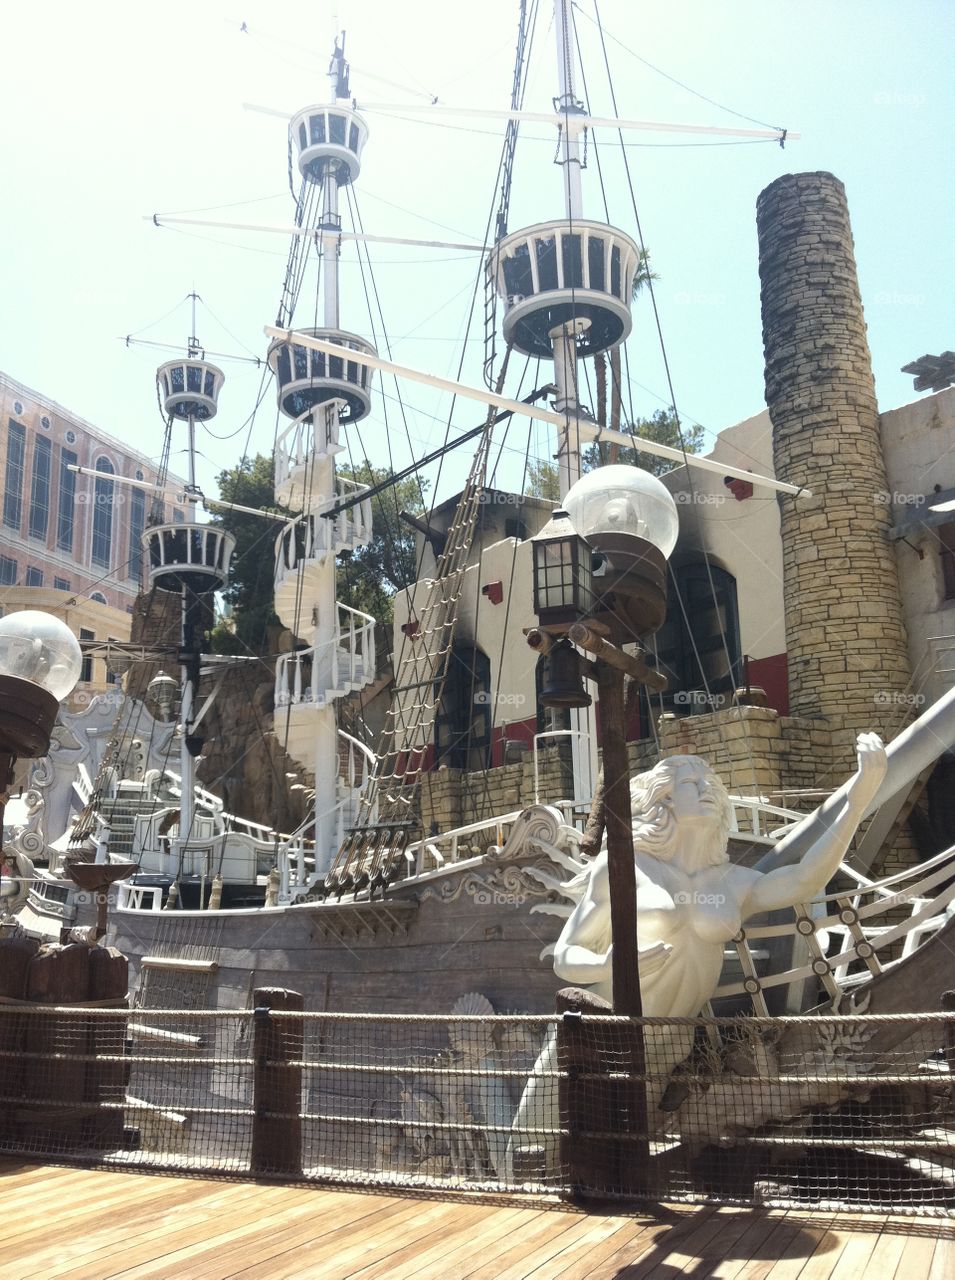 One of the beautifully crafted ships which greets guests on the property of the Treasure Island Hotel in Vegas